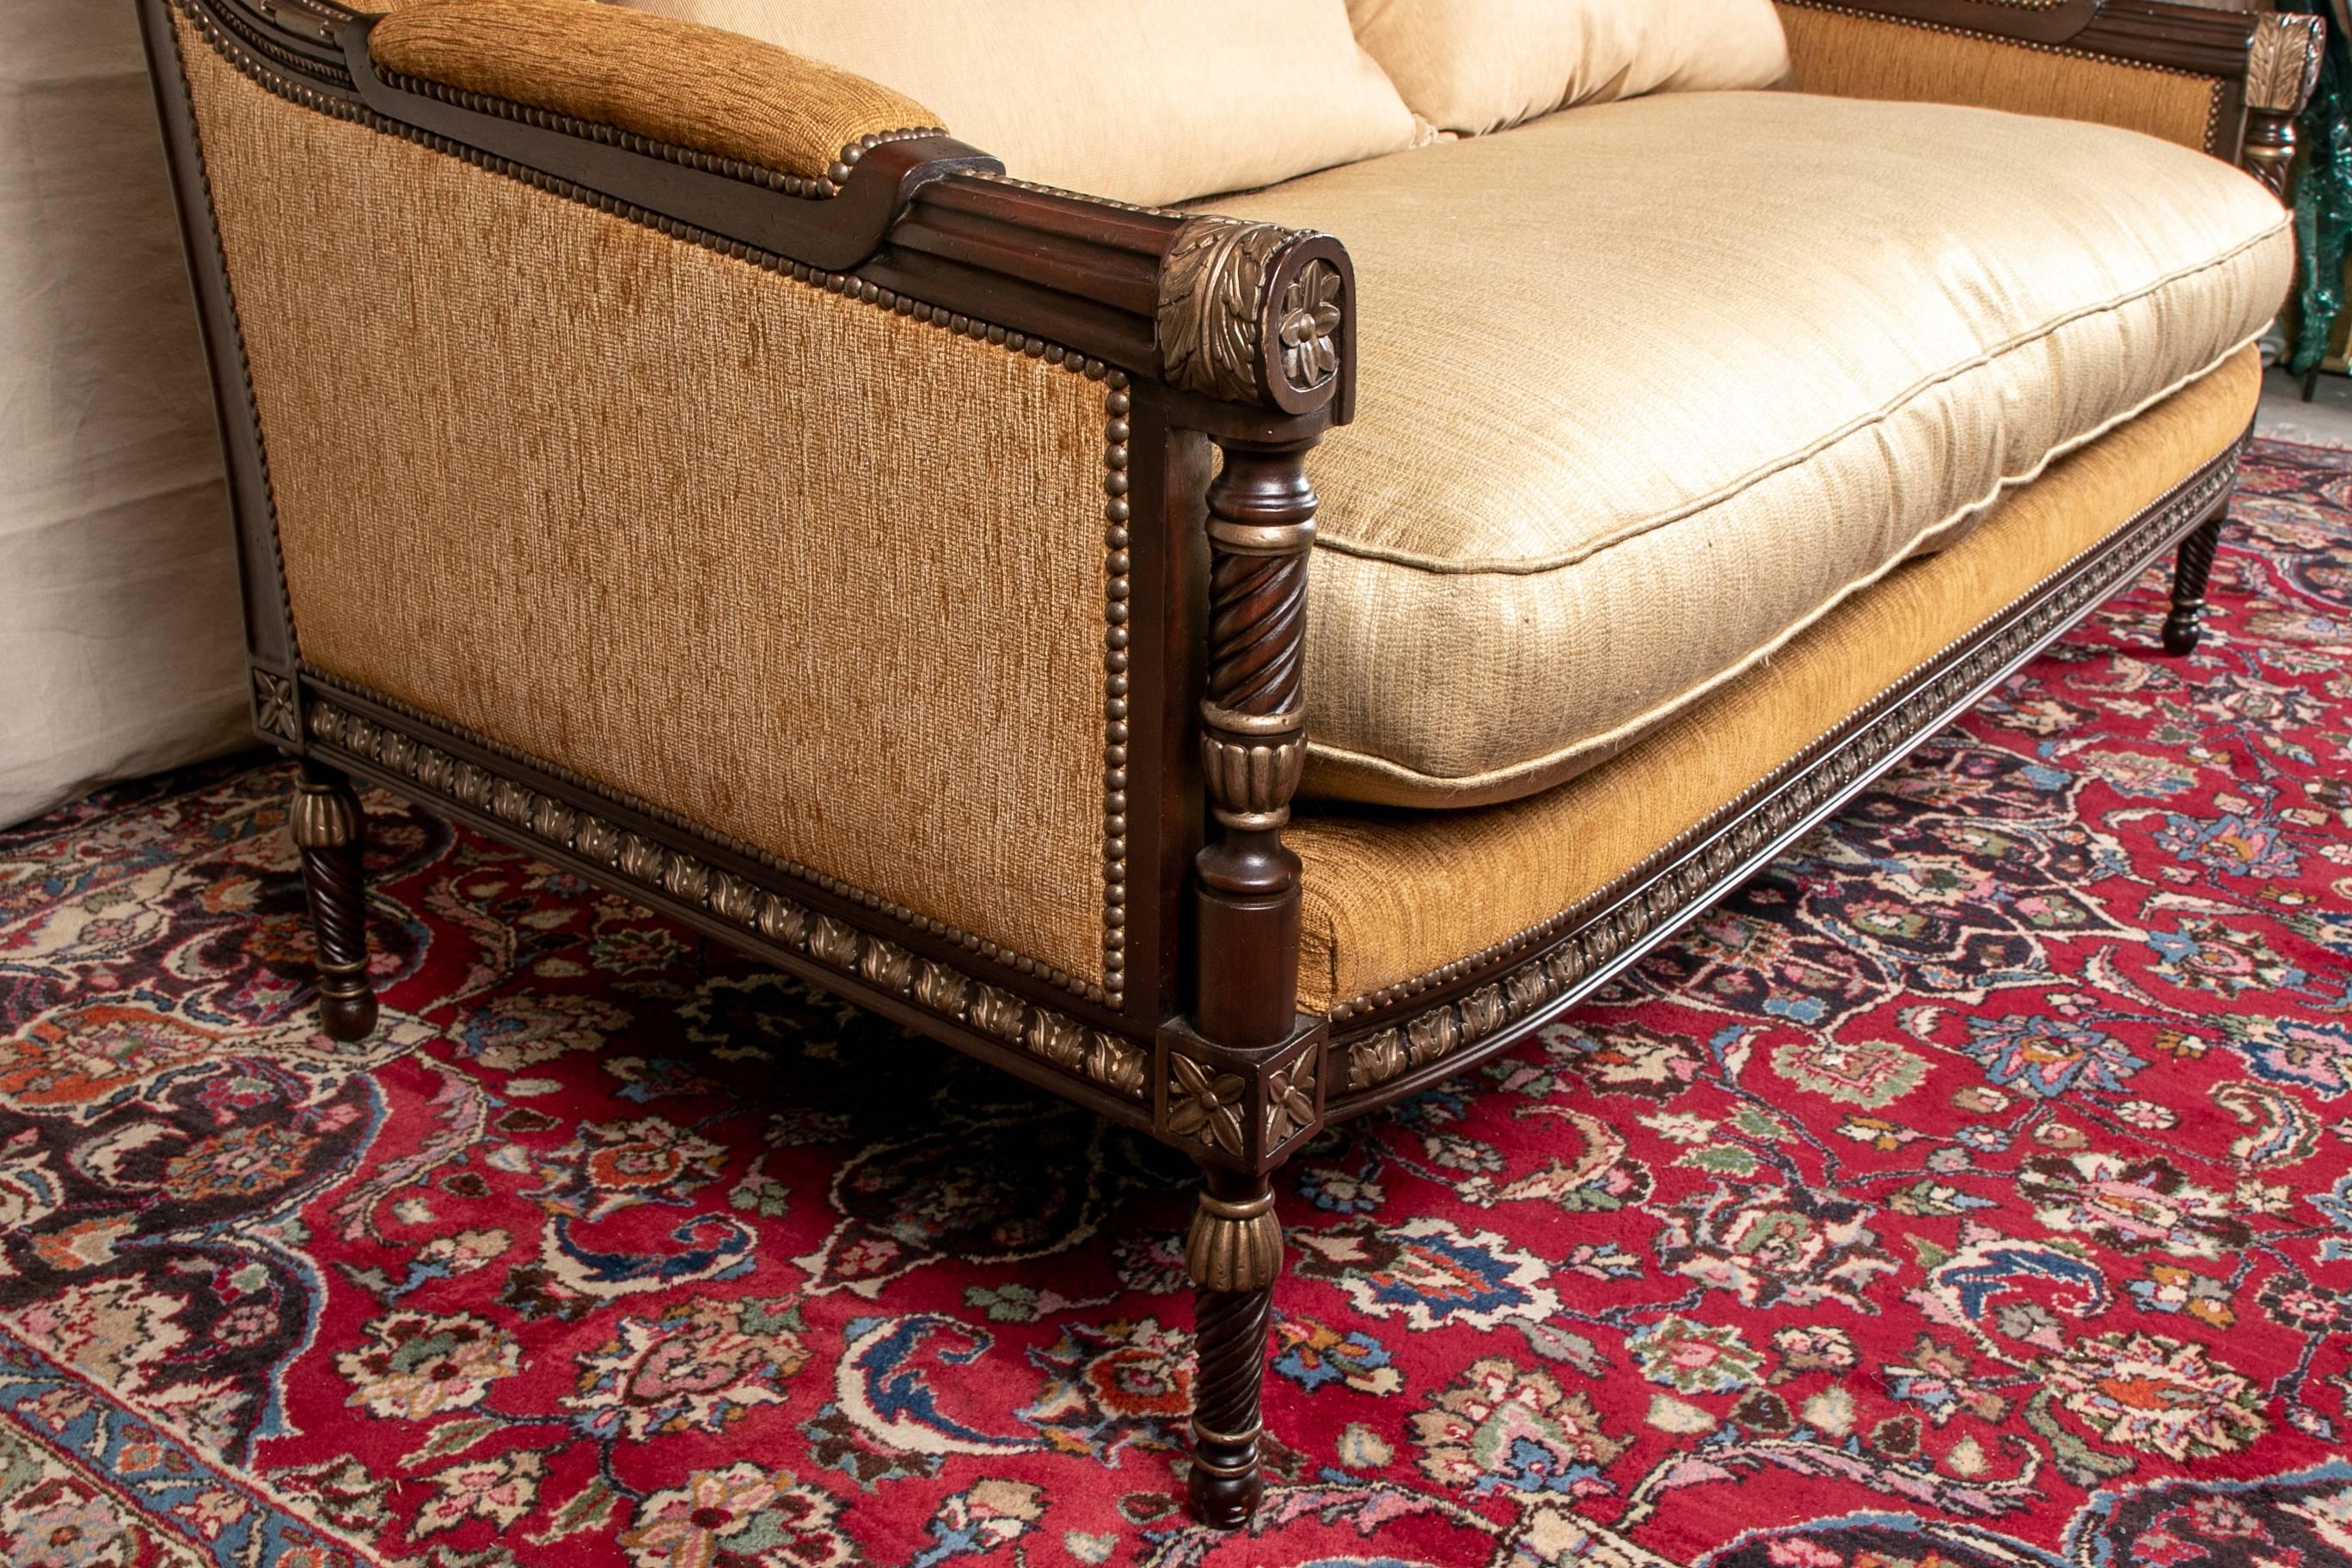 Berber Kamlah collection for CHB, carved and gilt mahogany frame with turned arms and legs, a leafy frieze on the lower frame, and a large gilt bow and leaf crest rail finial, upholstered in a tan textured fabric with nail heads, the cushions in a